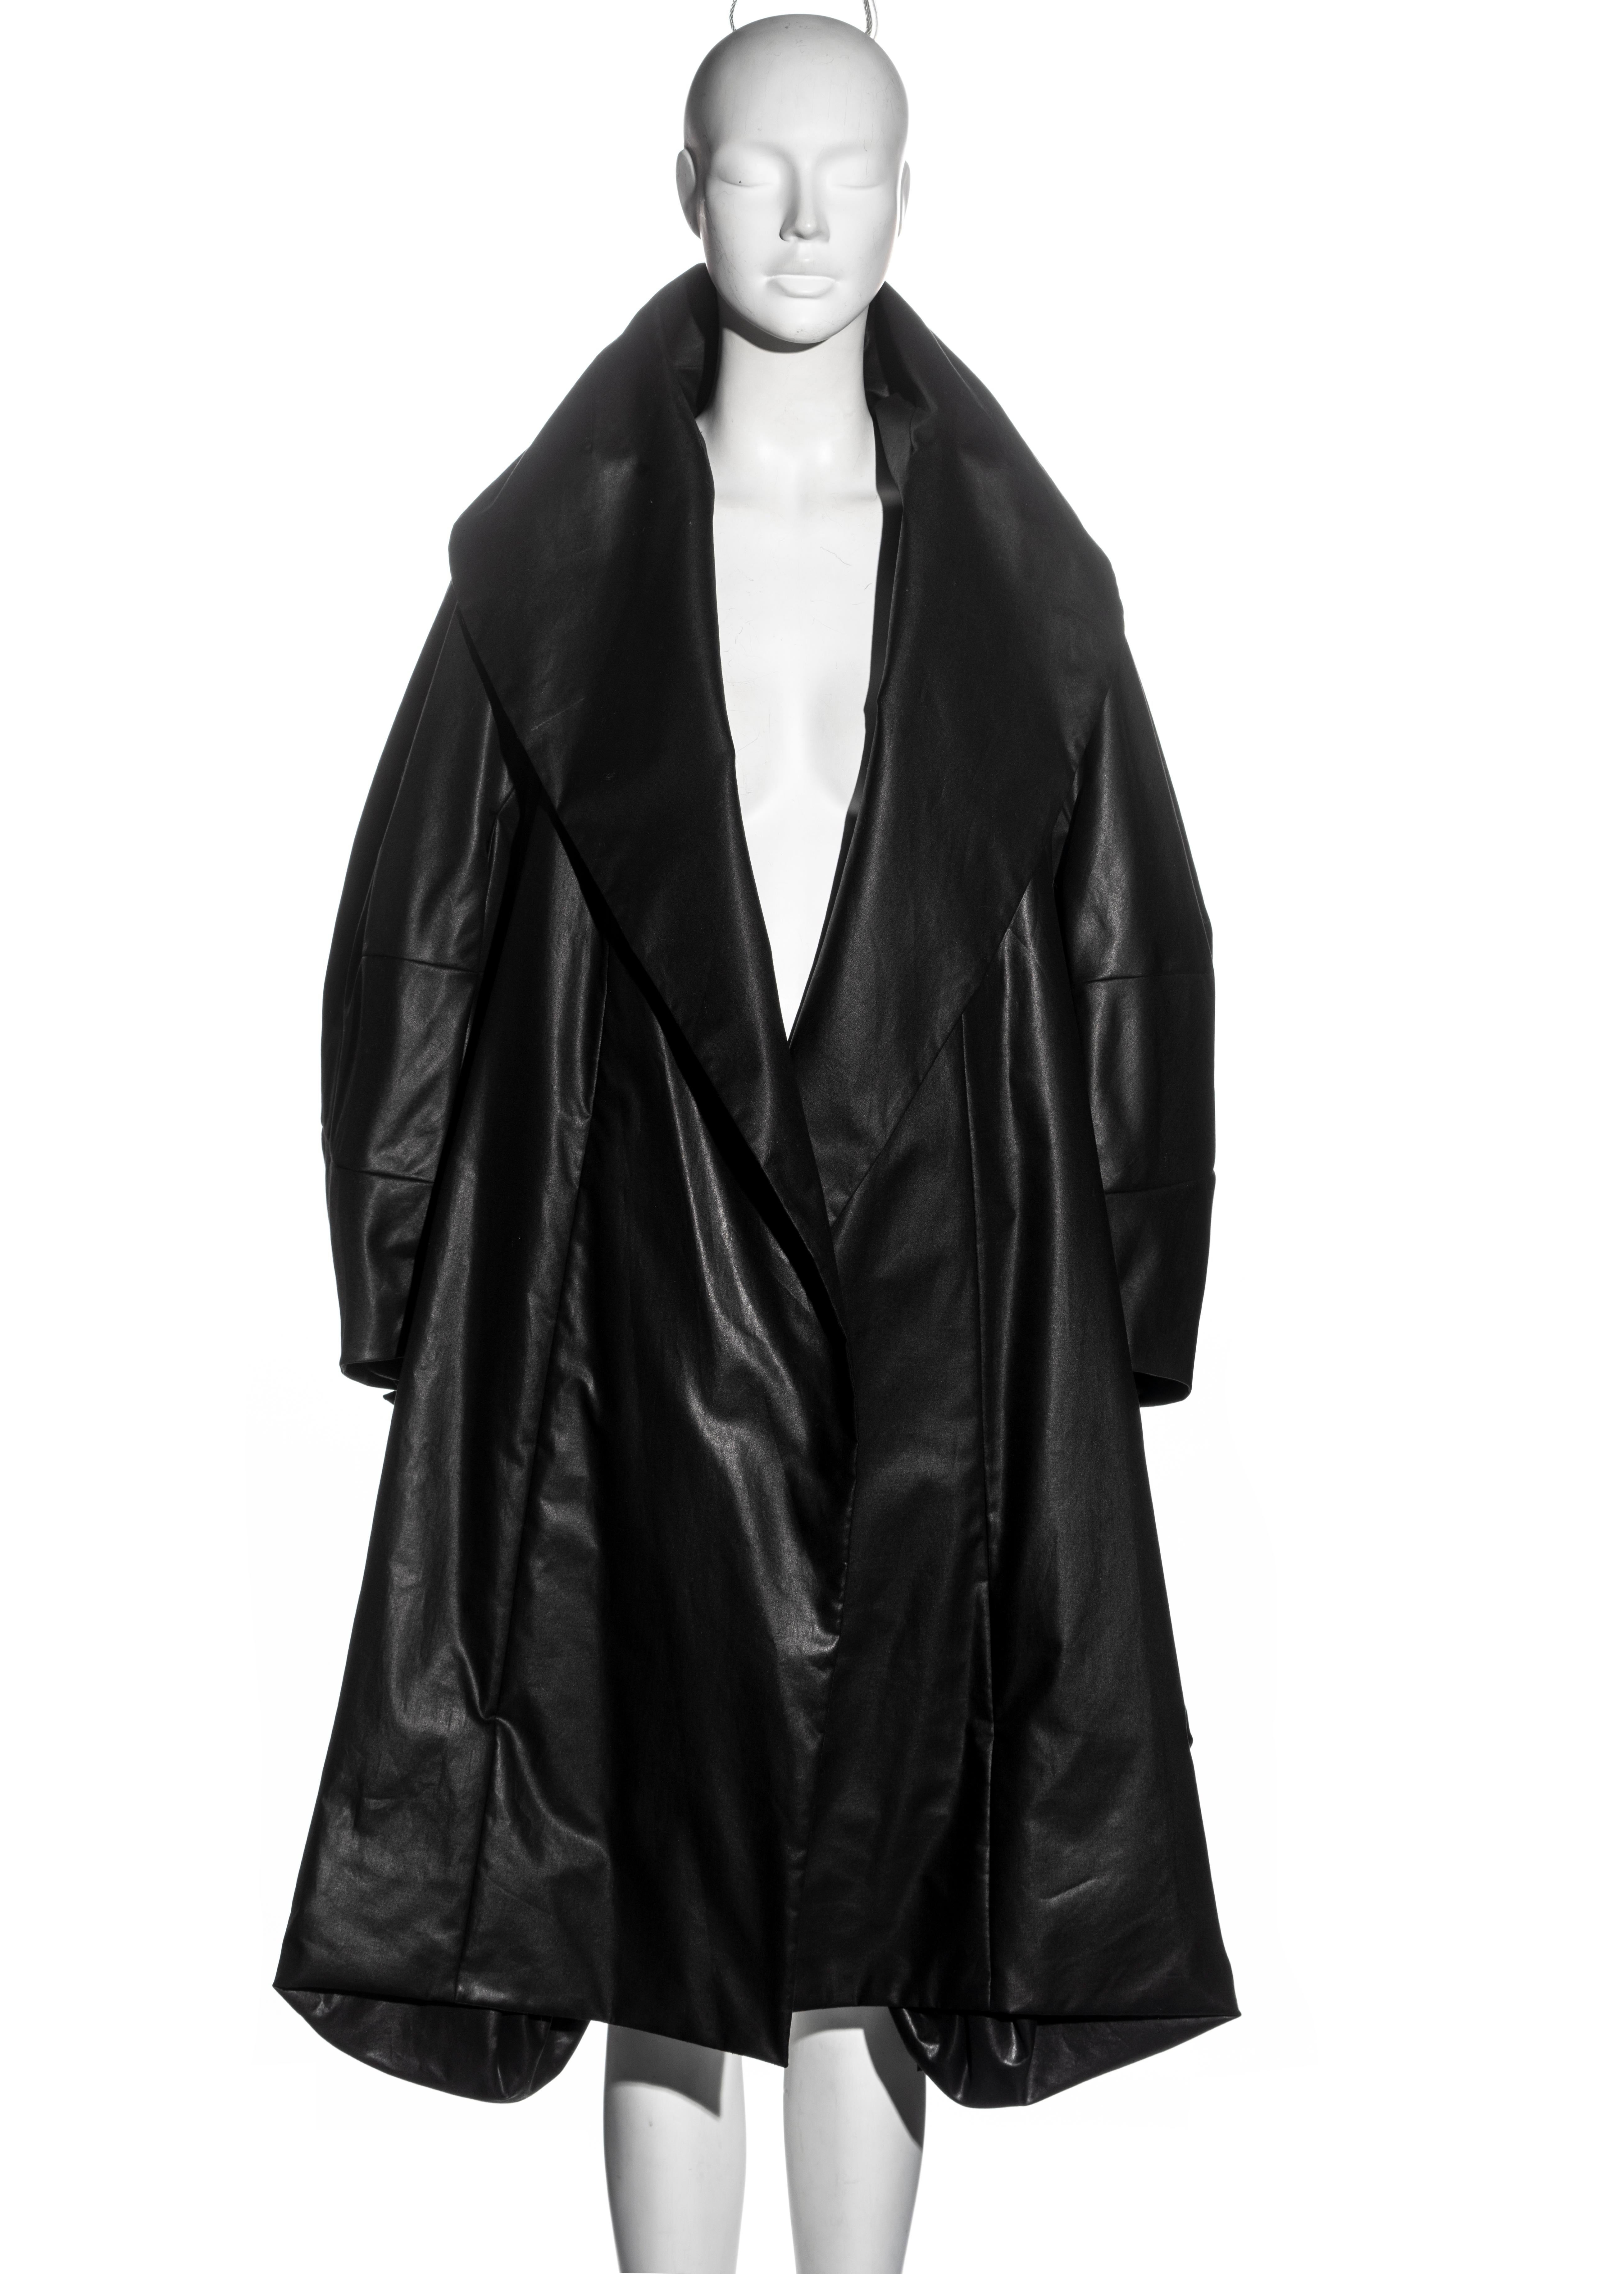 ▪ Christian Dior opera coat 
▪ Designed by John Galliano
▪ Black waxed cotton 
▪ Voluminous shape 
▪ Shawl lapel 
▪ Wide sleeves 
▪ Two ties at the back fasten to create a bustle
▪ FR 40 - UK 12 - US 8
▪ Spring-Summer 1999
▪ 100% Cotton, Lining: